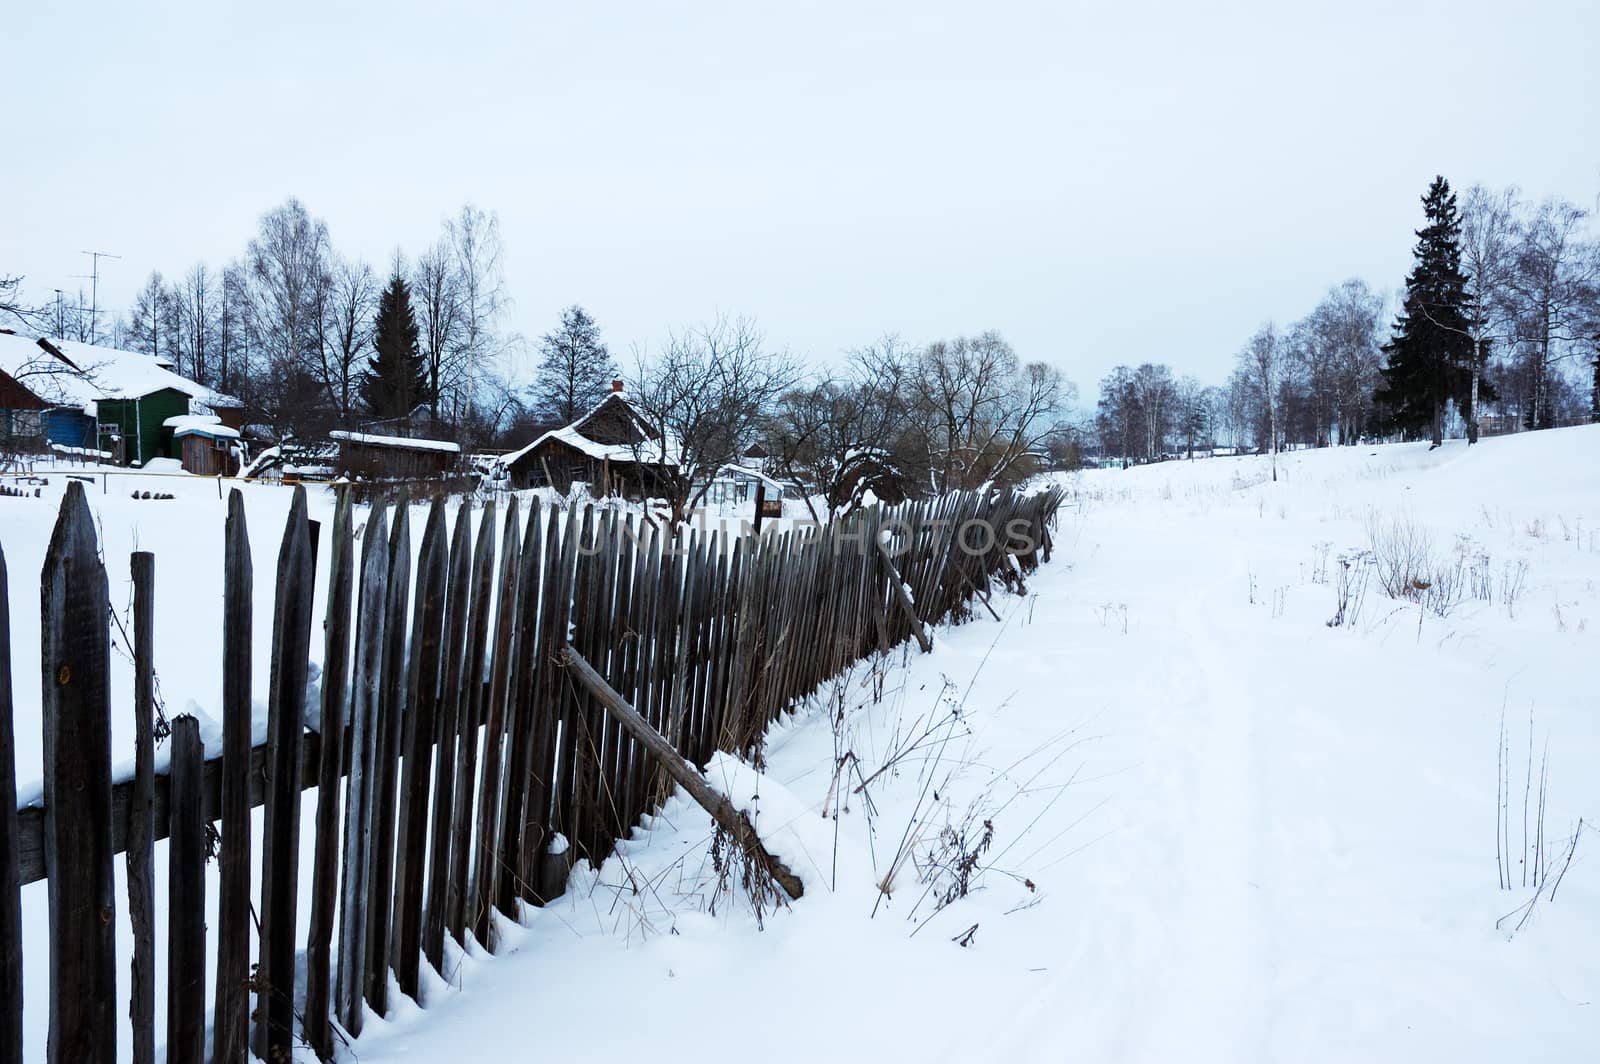 Winter landscape with snowy footpath along the wooden fence